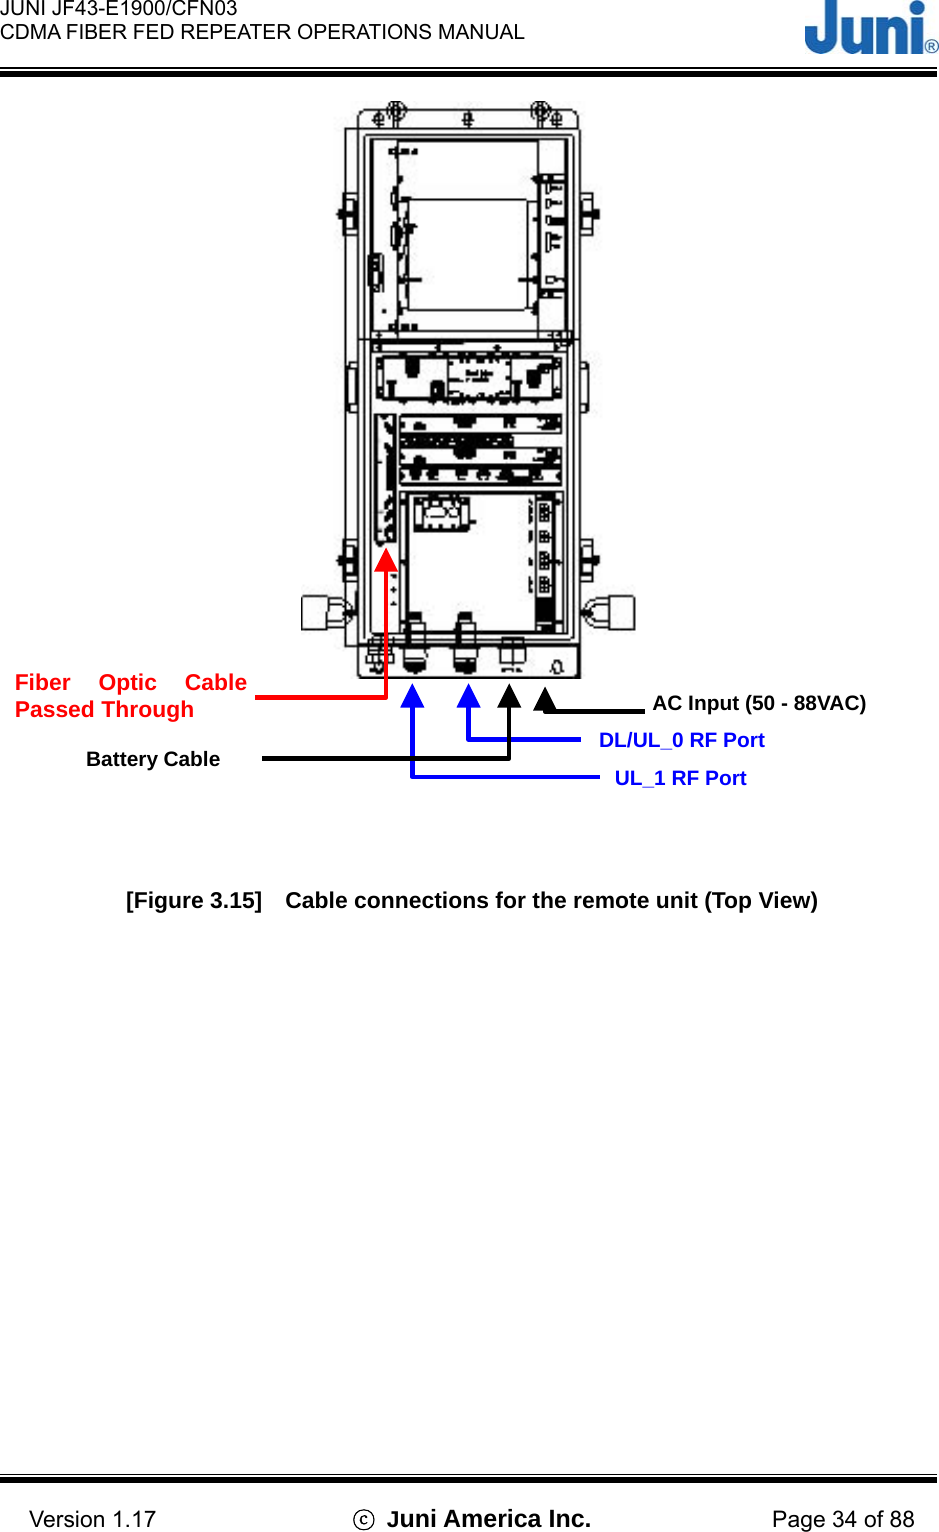  JUNI JF43-E1900/CFN03 CDMA FIBER FED REPEATER OPERATIONS MANUAL                                    Version 1.17  ⓒ Juni America Inc. Page 34 of 88  [Figure 3.15]    Cable connections for the remote unit (Top View)  Fiber Optic CablePassed Through UL_1 RF Port DL/UL_0 RF Port AC Input (50 - 88VAC) Battery Cable 